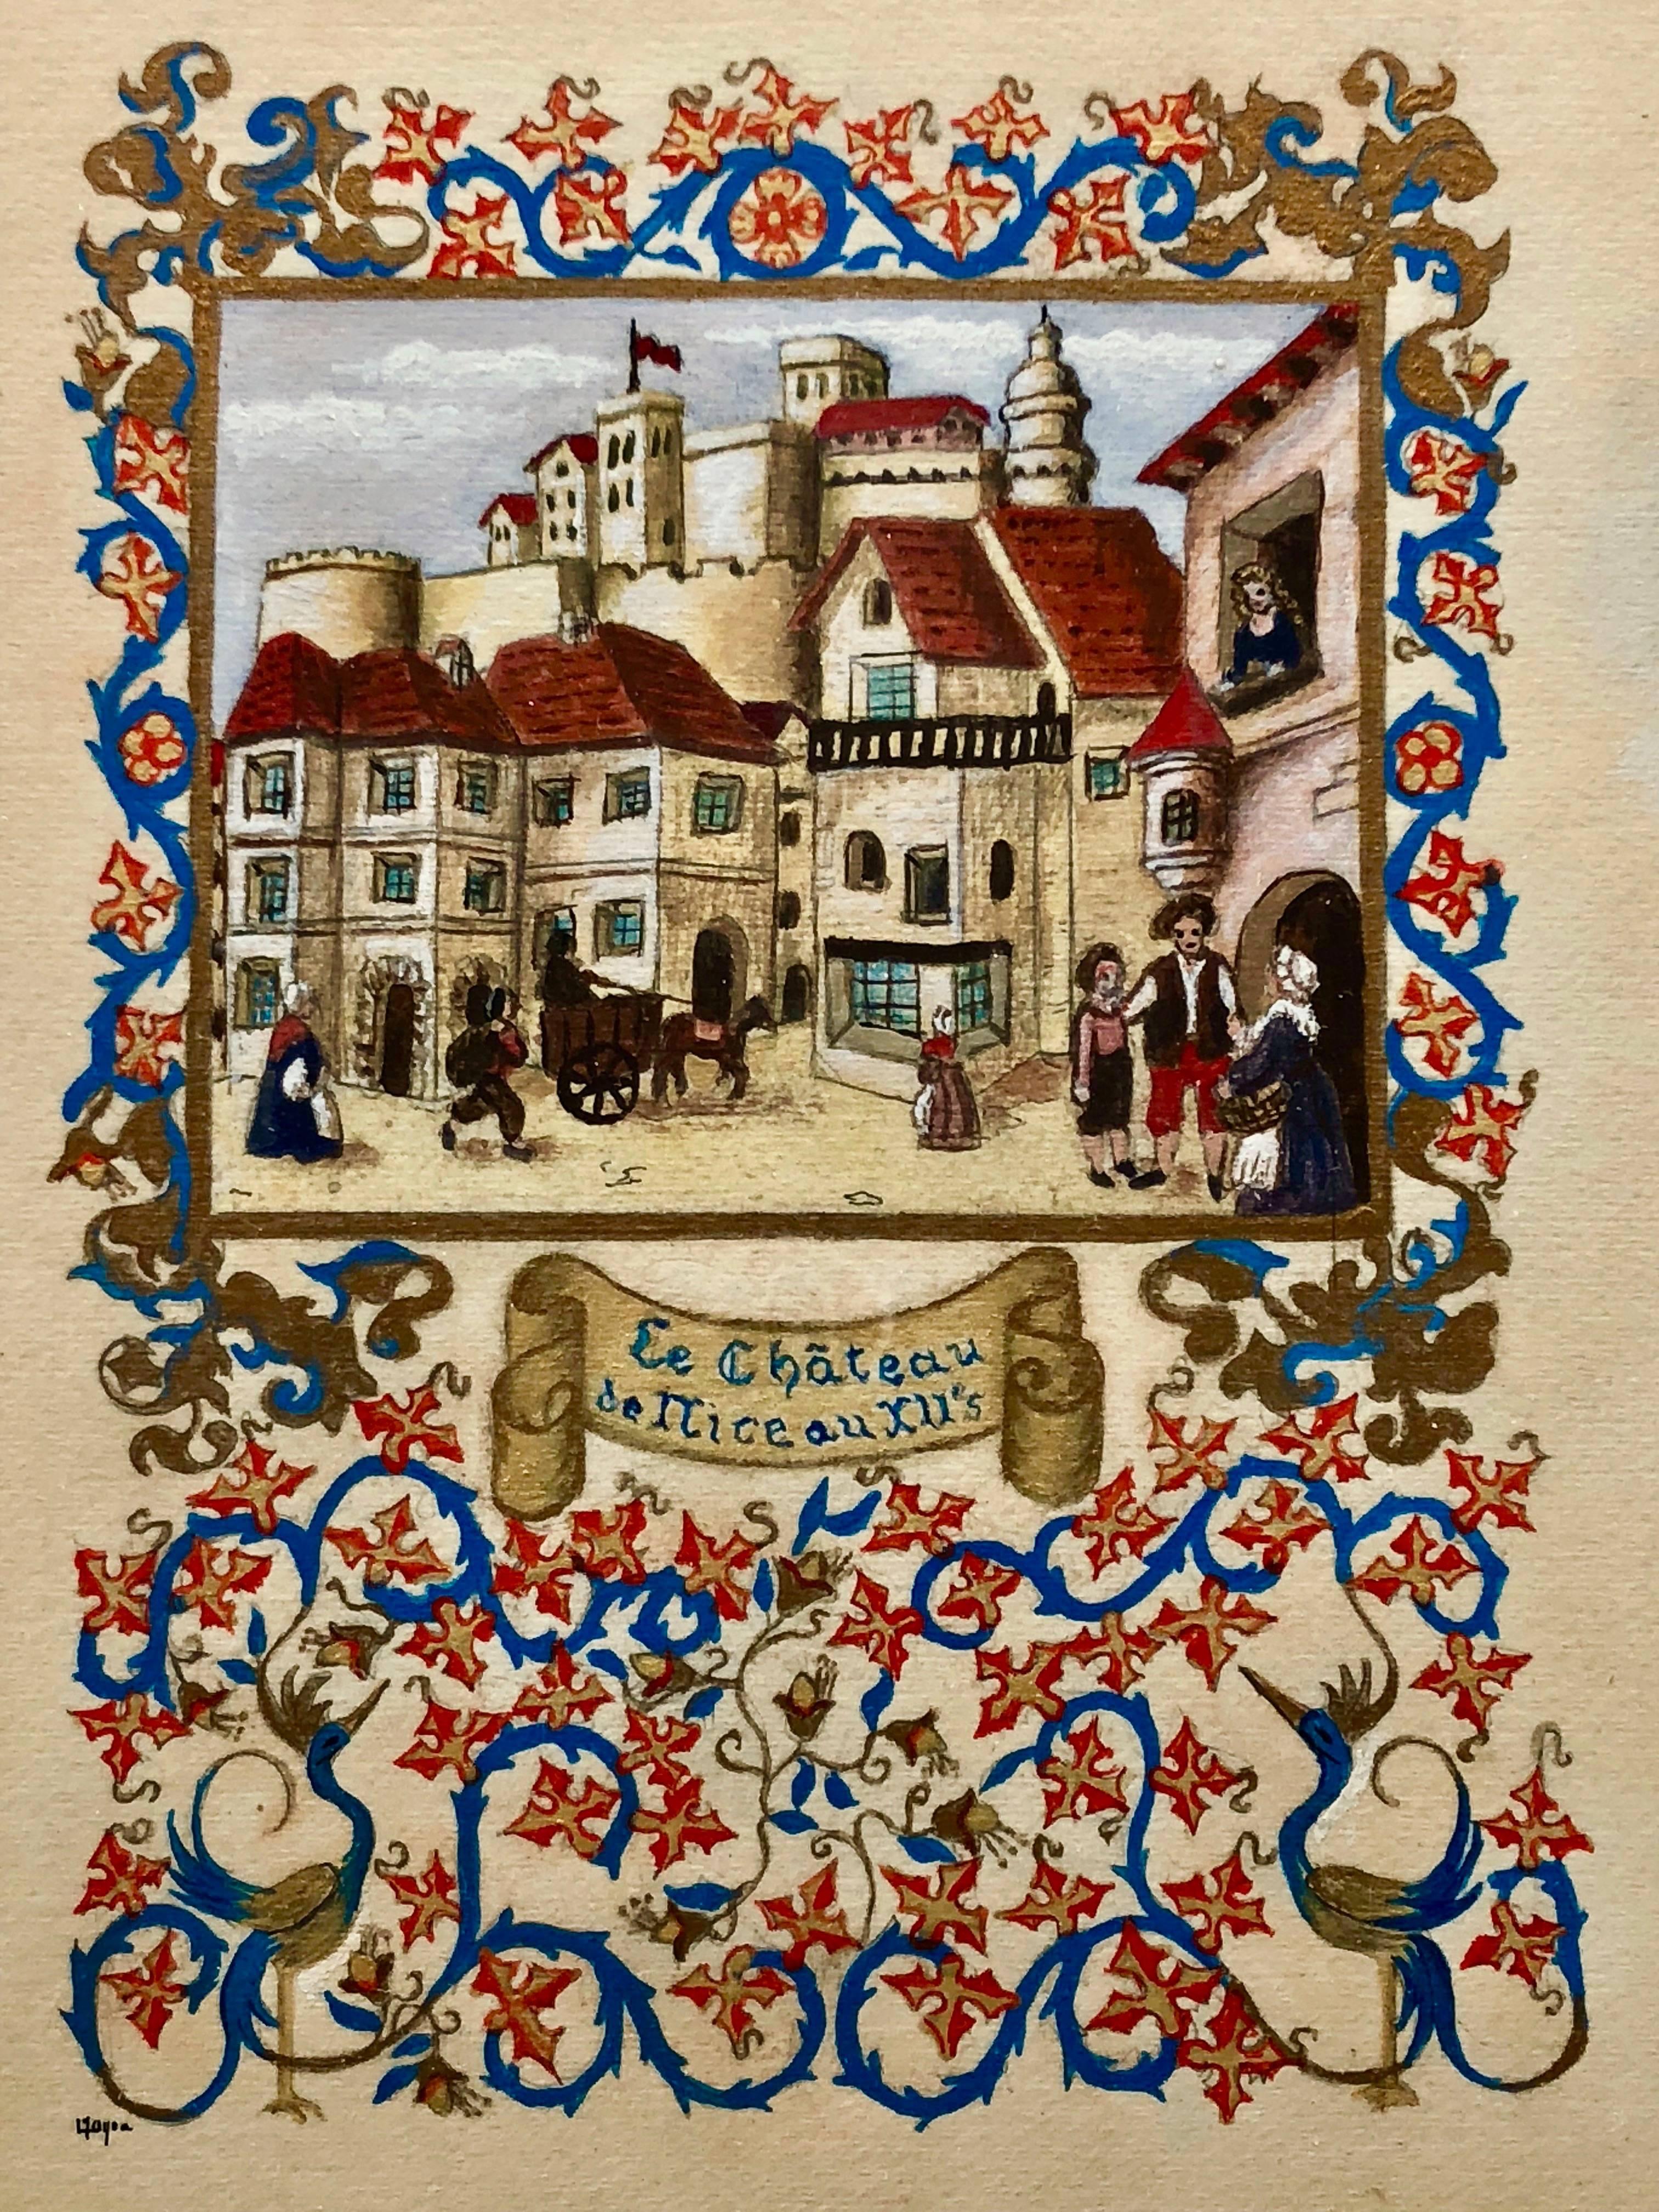 This is a lovely French Aquarelle of the Chateau de Nice in the 13th century, likely painted in the early 1980s. This painting on paper is in a detailed gold frame and has a signature, but it is difficult to read. The richly painted blue, red and